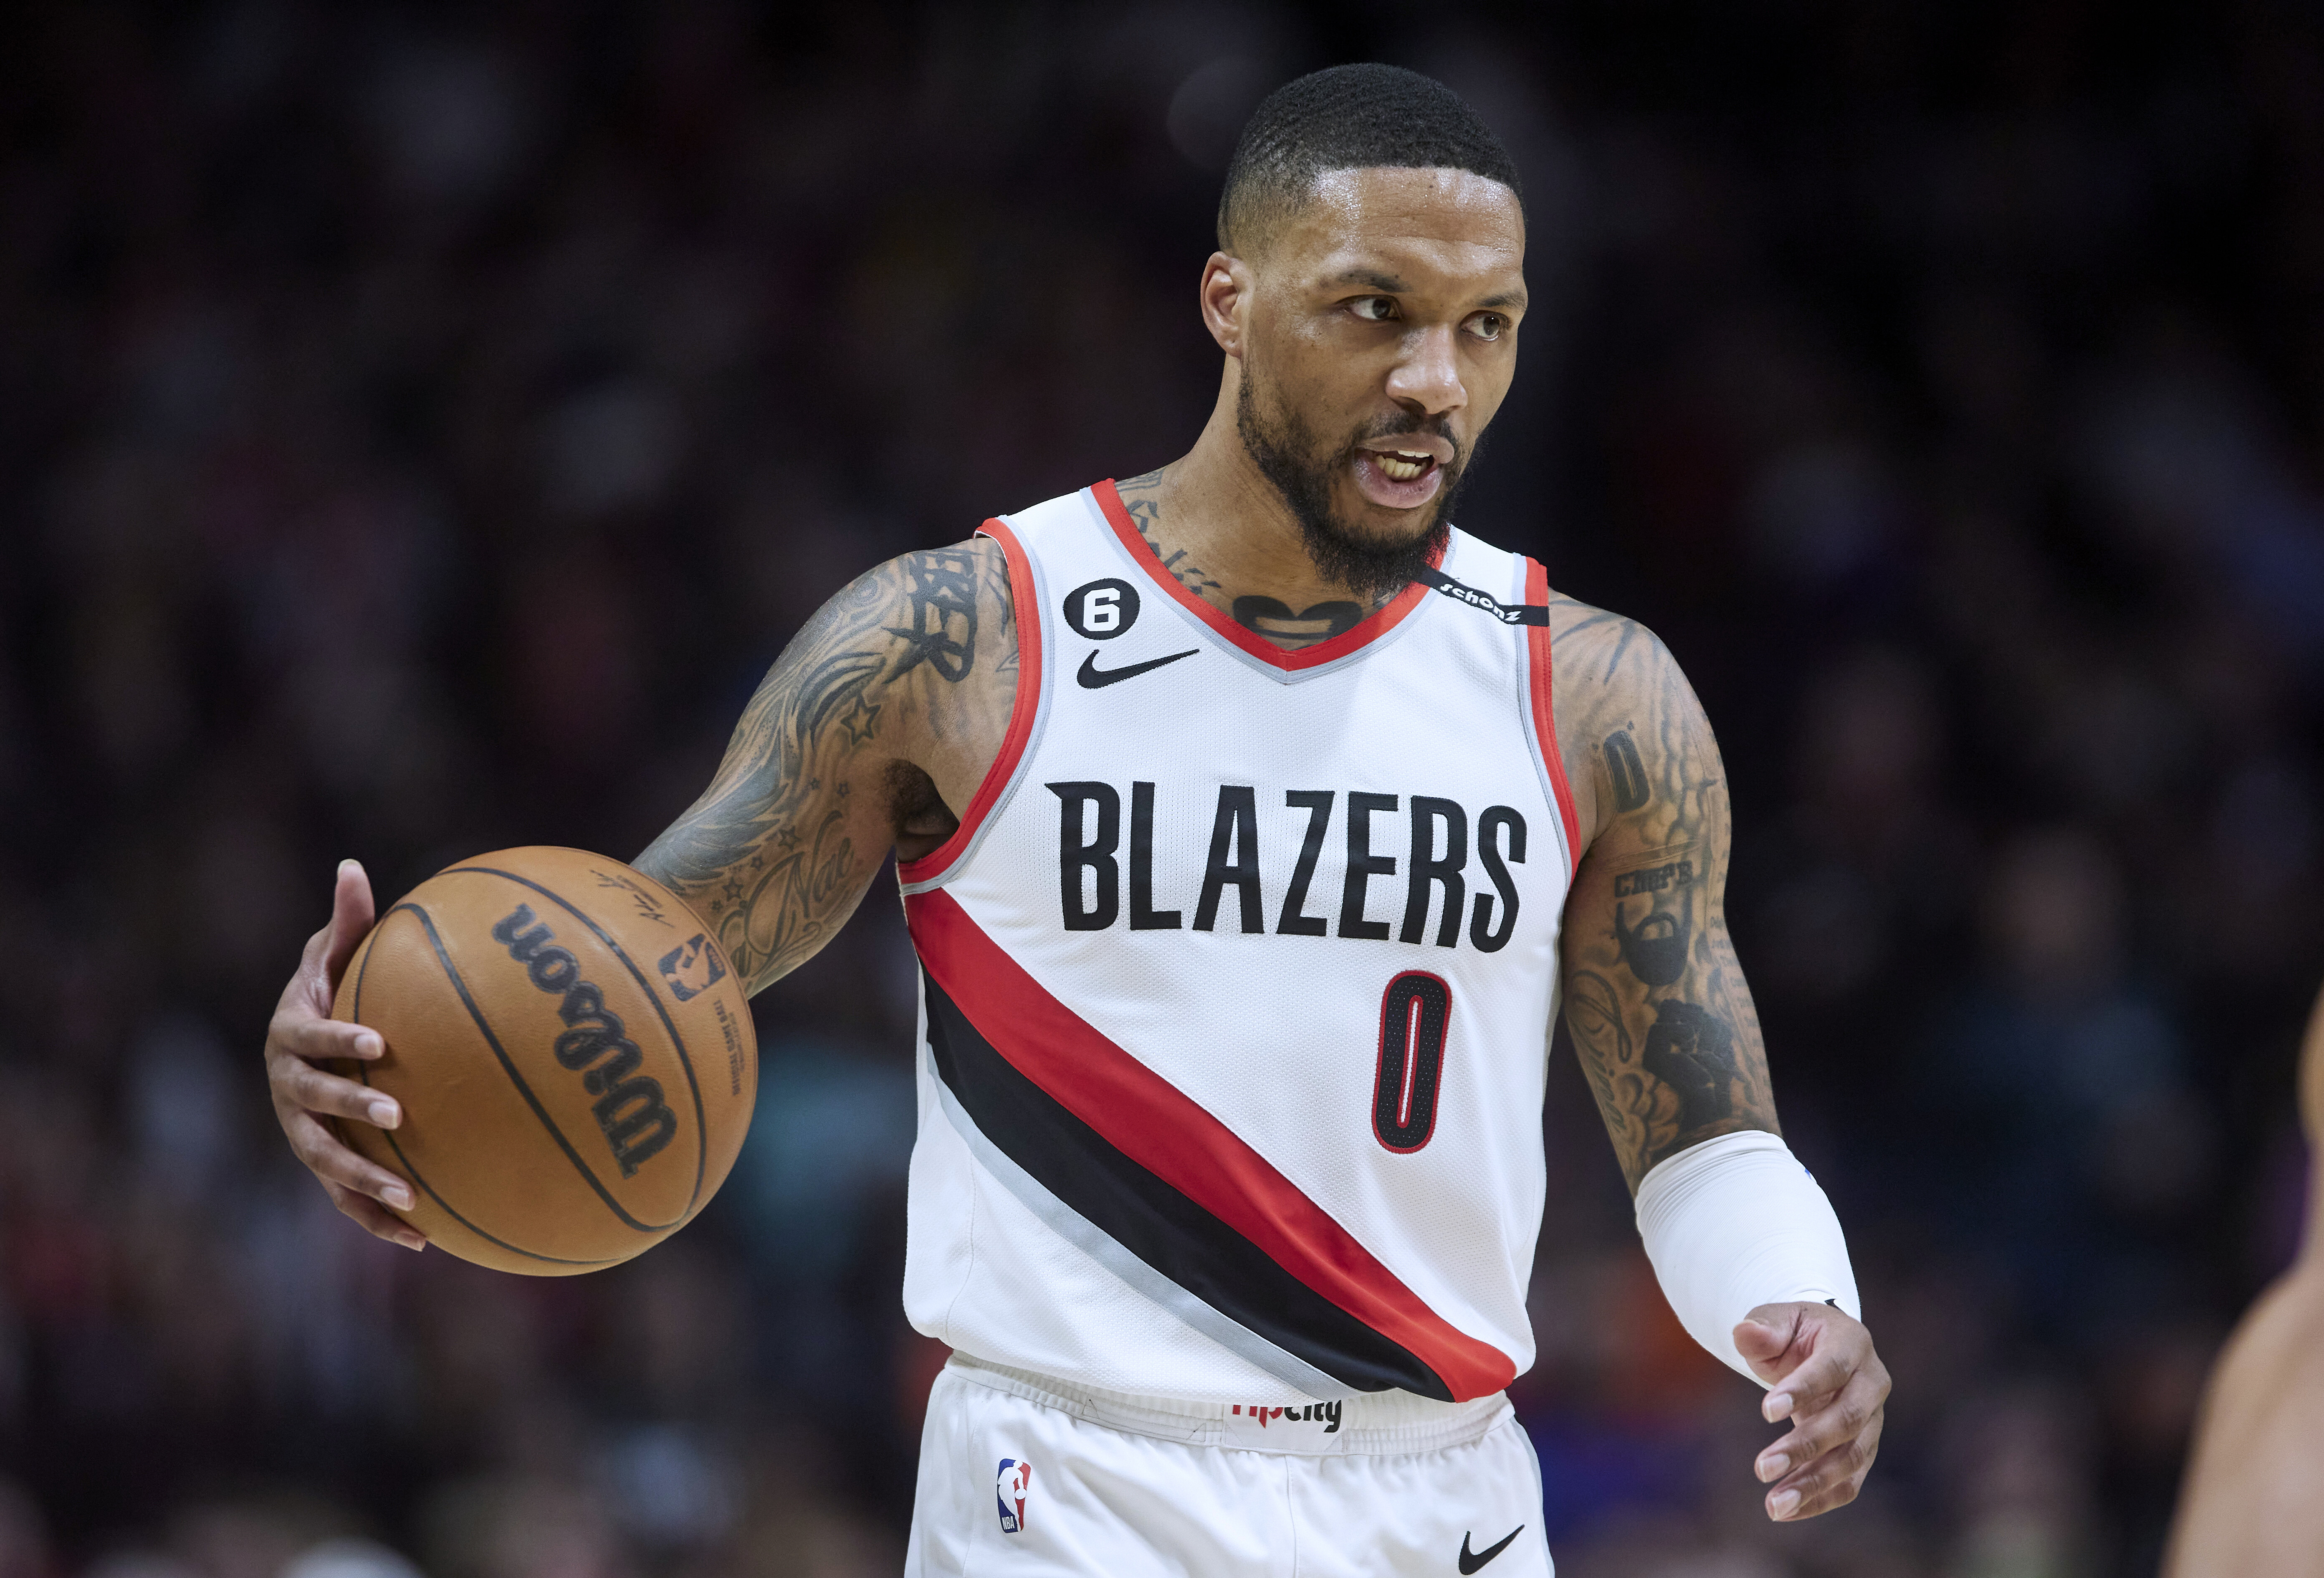 Damian Lillard requests trade from Trail Blazers after 11 seasons